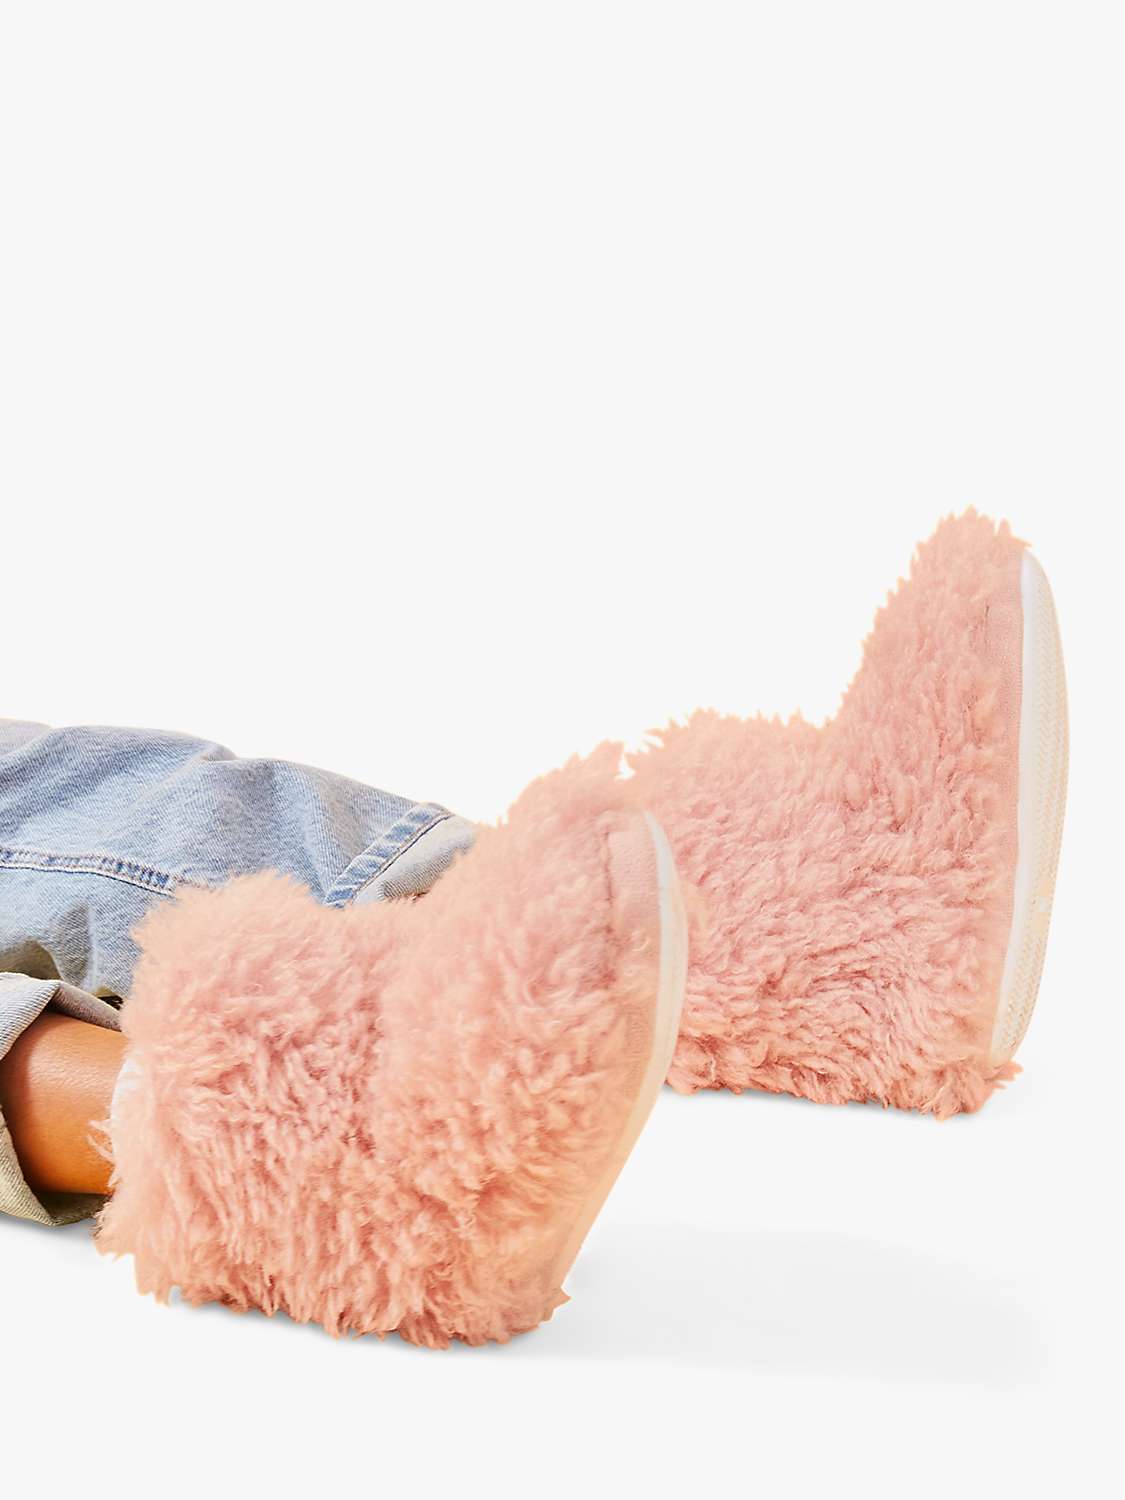 Buy Angels by Accessorize Kids' Fluffy Yeti Slipper Boots, Pink Online at johnlewis.com